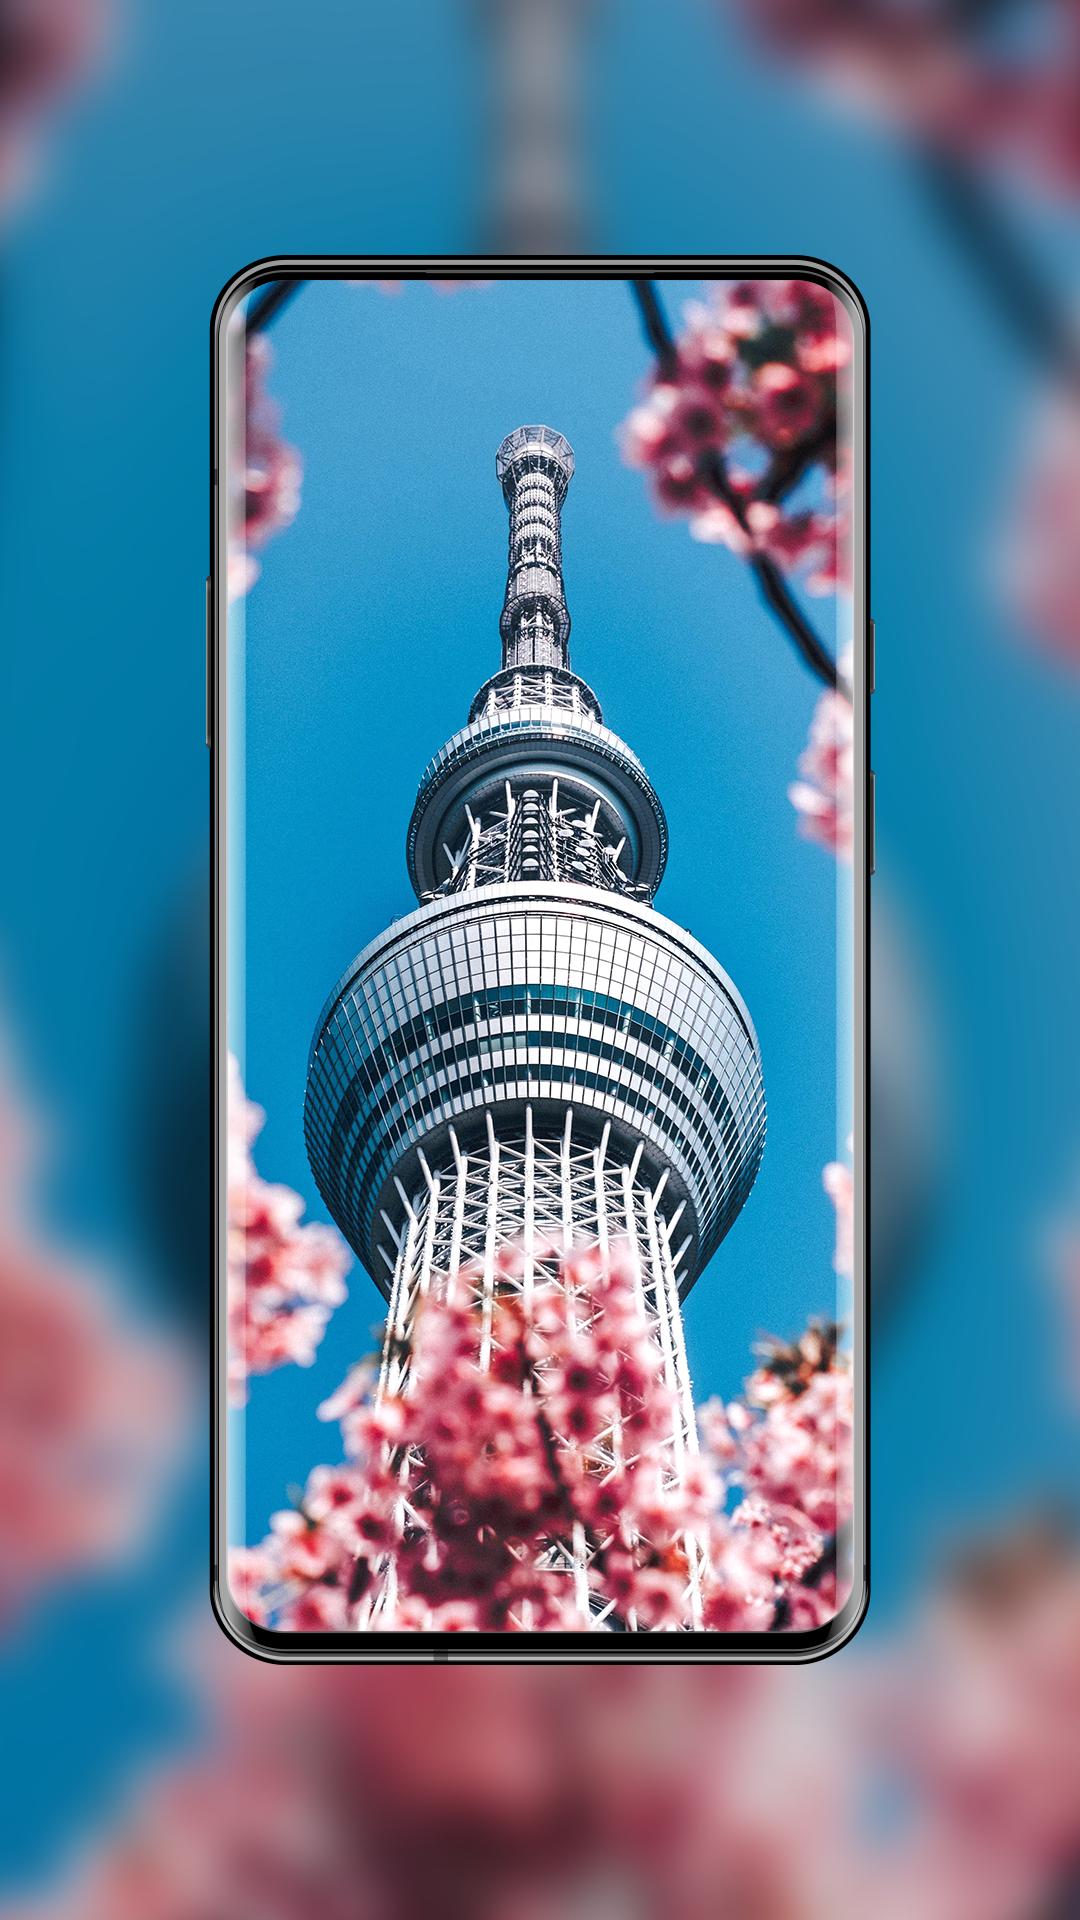  4K  Wallpapers  HD  QHD  Backgrounds  for Android APK 